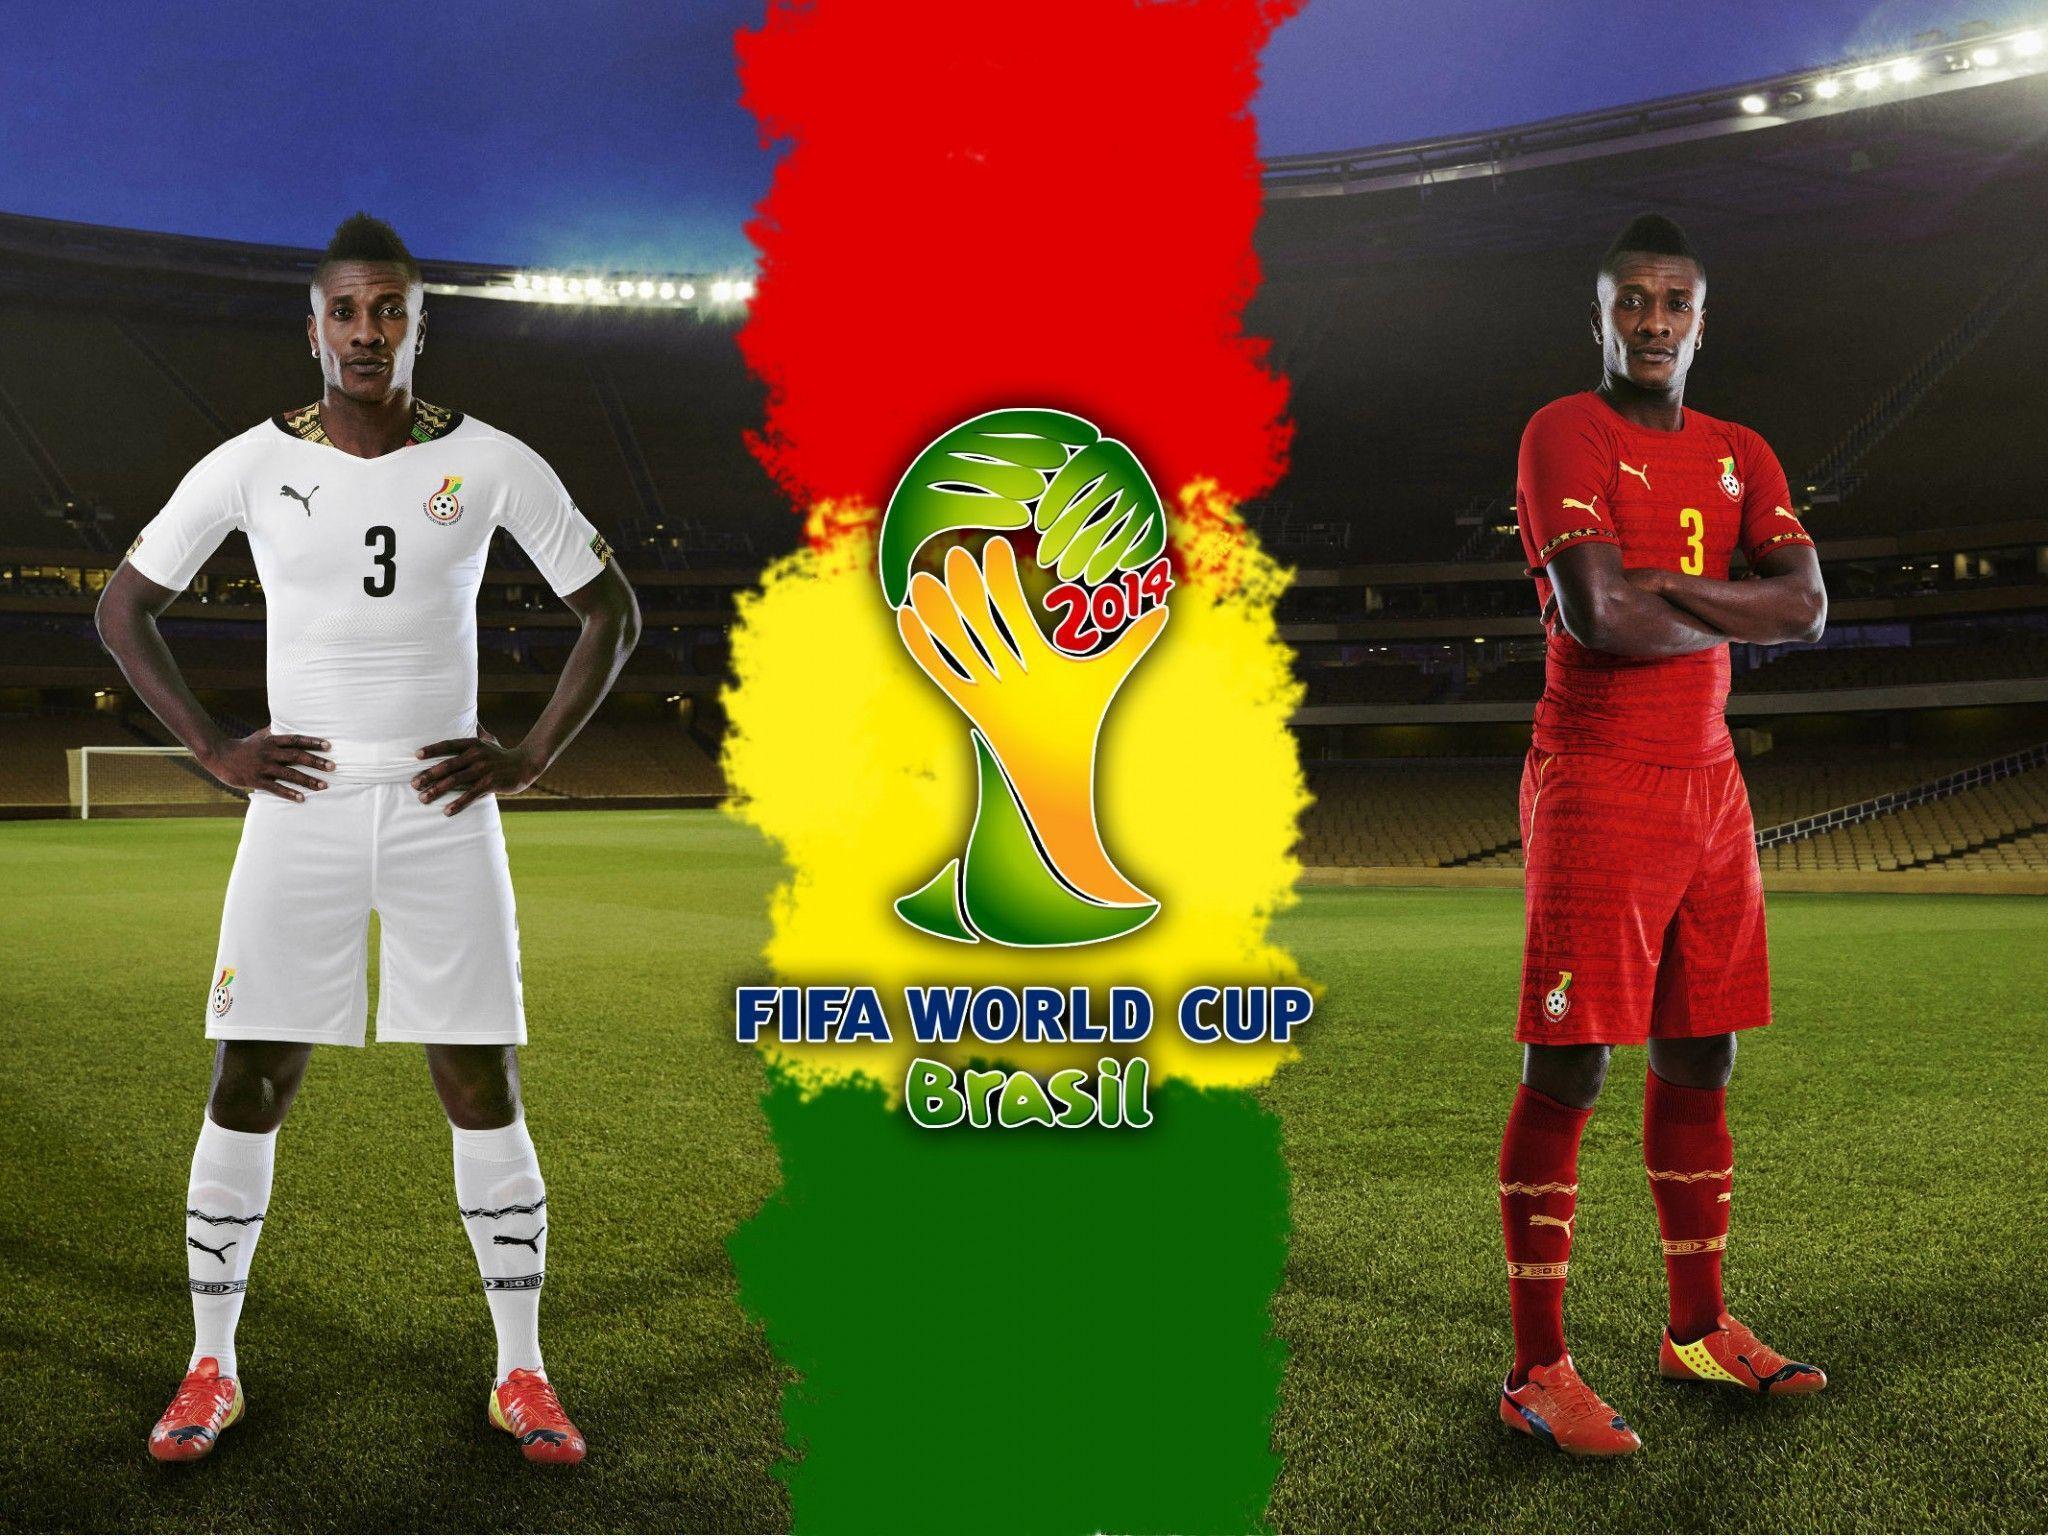 Ghana at the World Cup in Brazil 2014 wallpaper and image